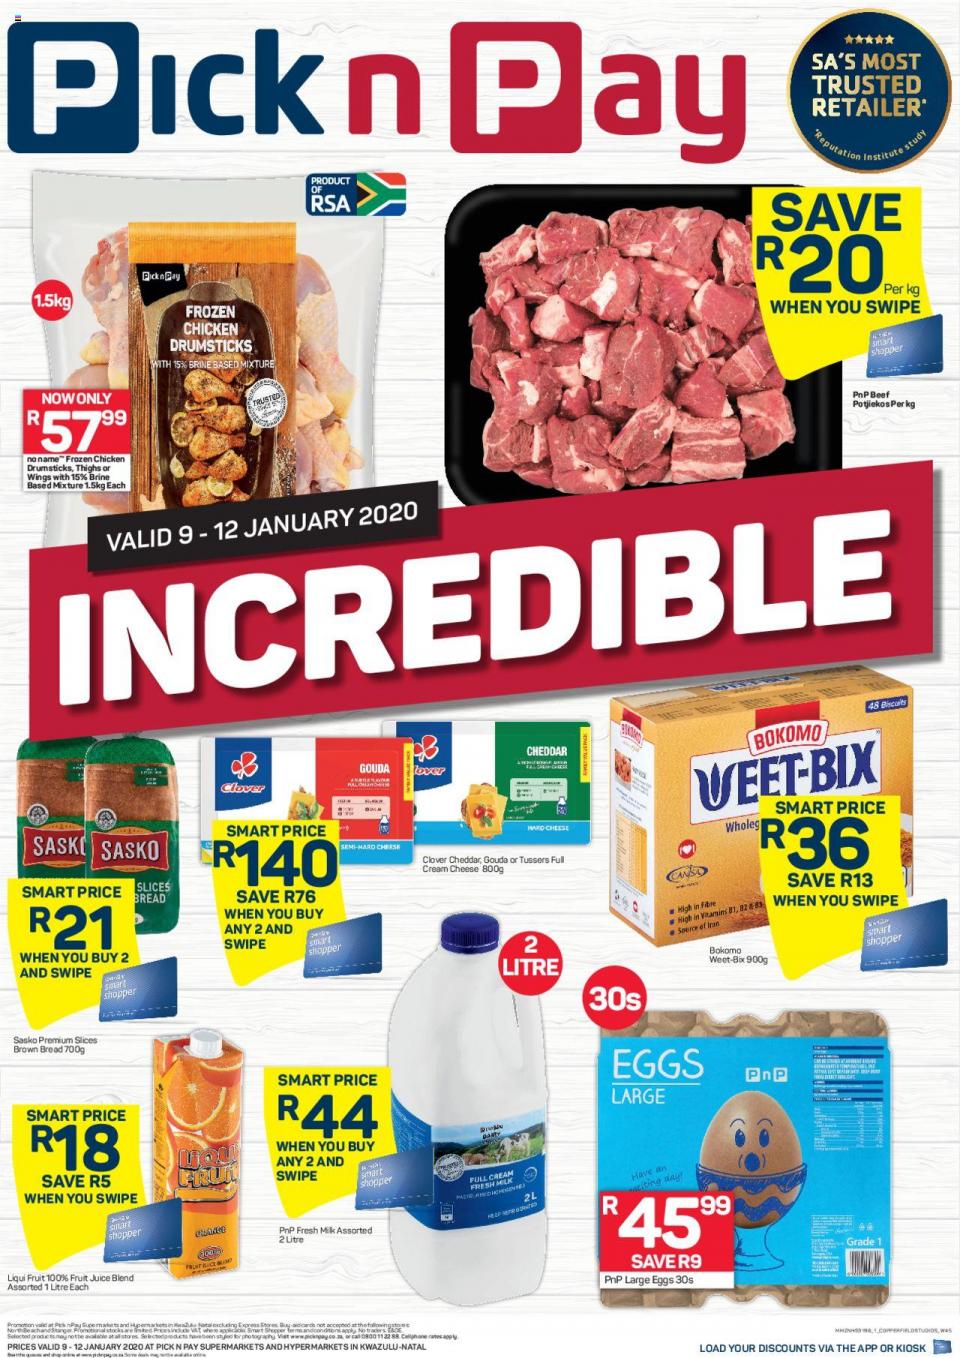 Pick n Pay Specials This Weekend 9 January 2020